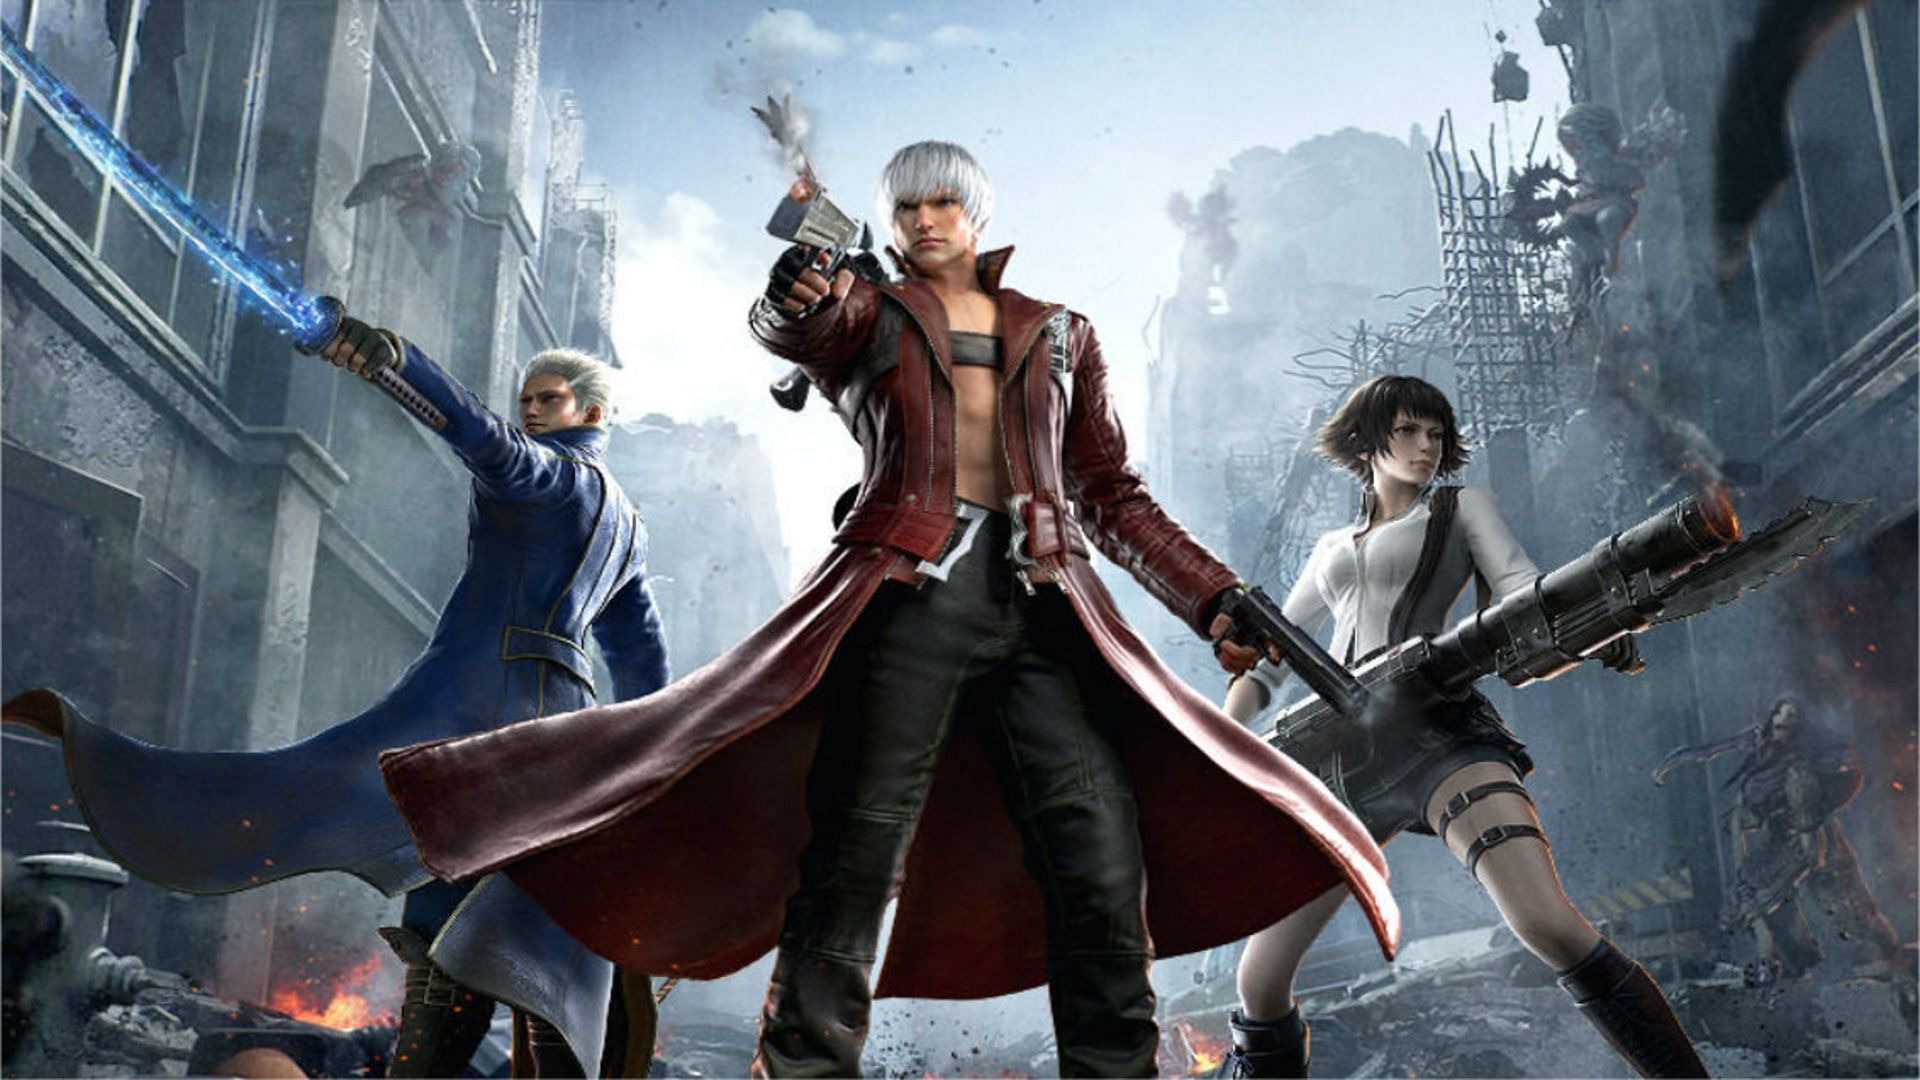 Guide to participate in the Devil May Cry: Peak of Combat closed beta (Image via Google)